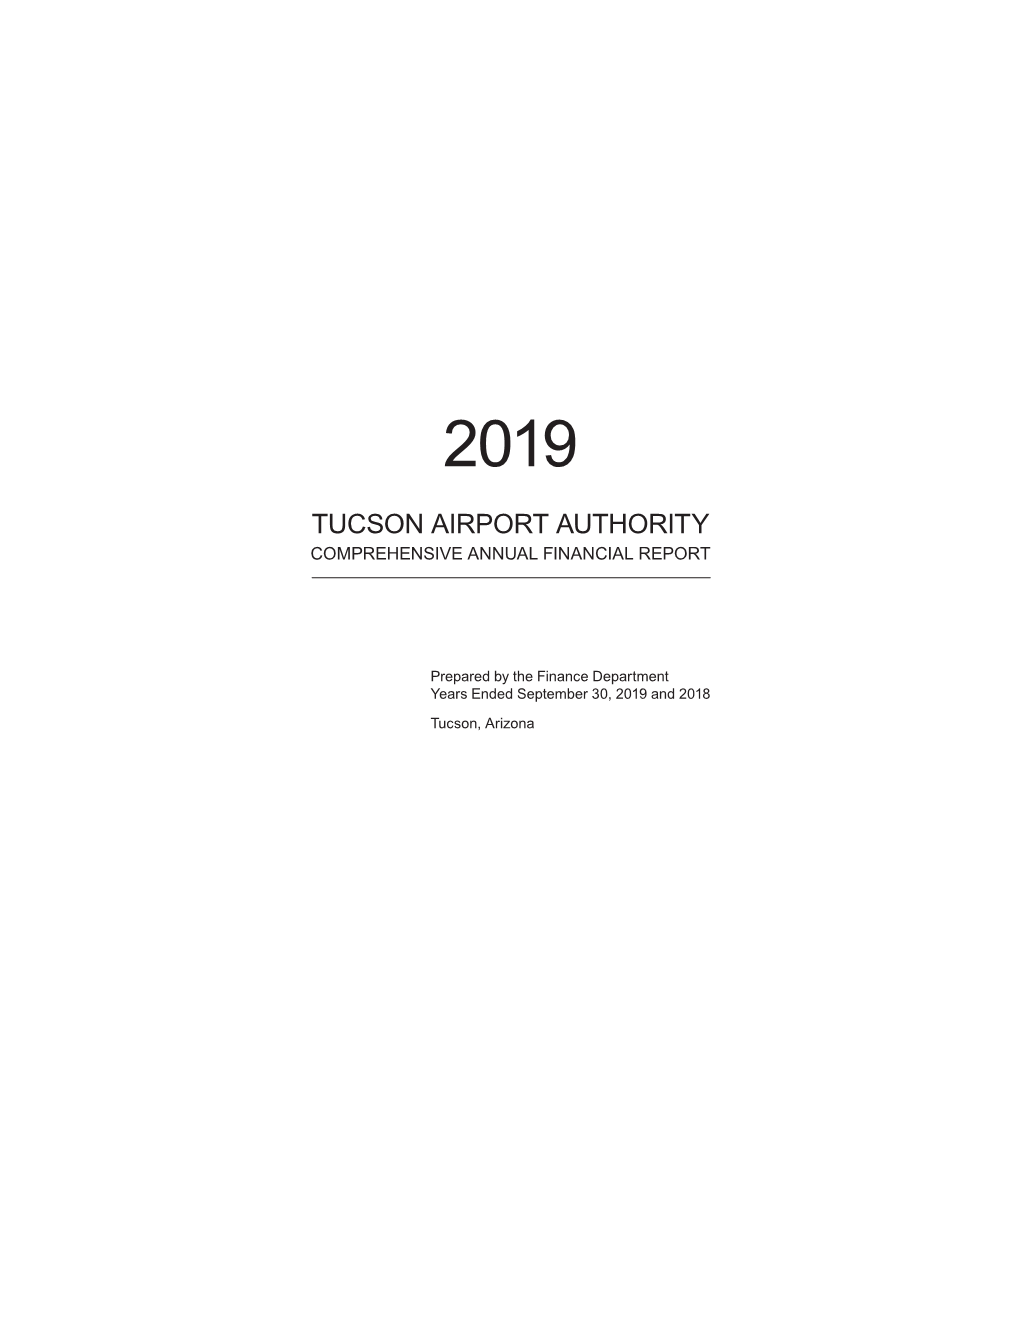 Tucson Airport Authority Comprehensive Annual Financial Report